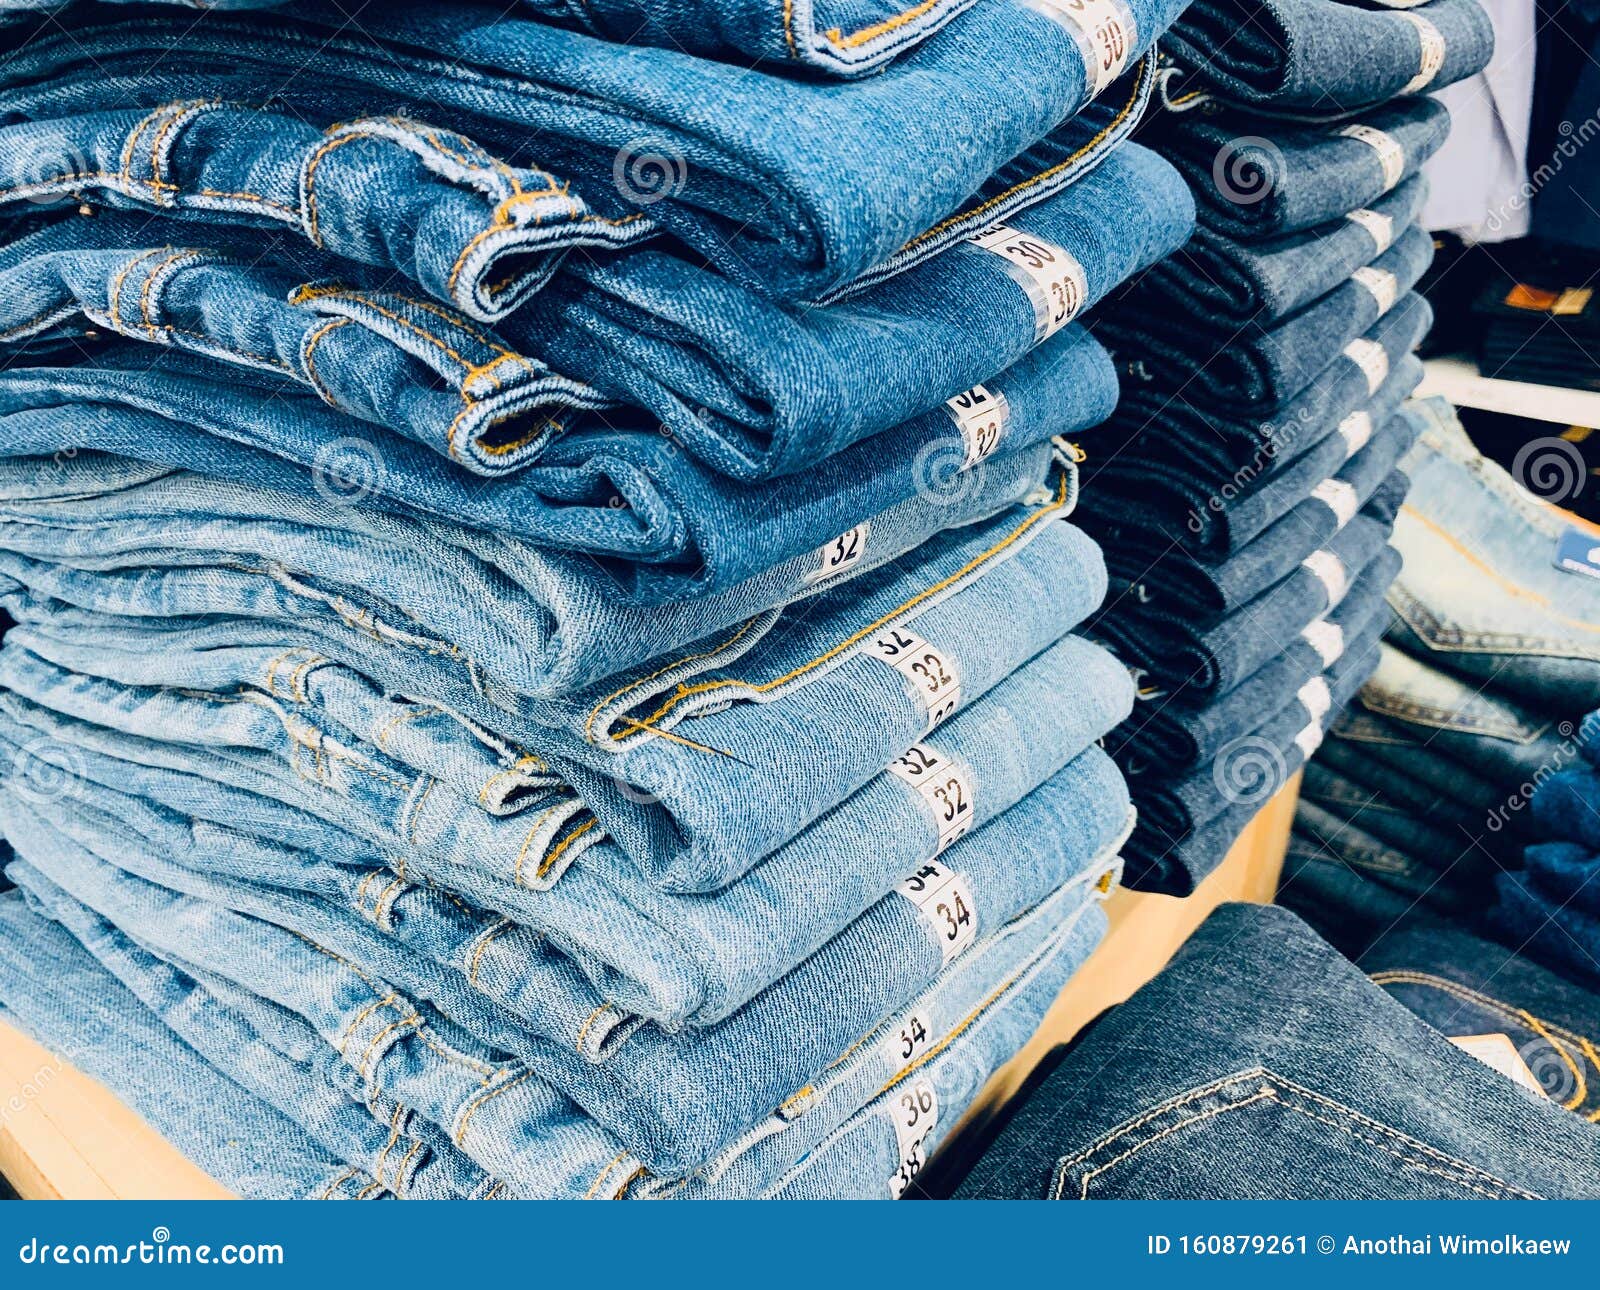 Jeans Pants on the Store Shelf Stock Image - Image of texture, jeans ...